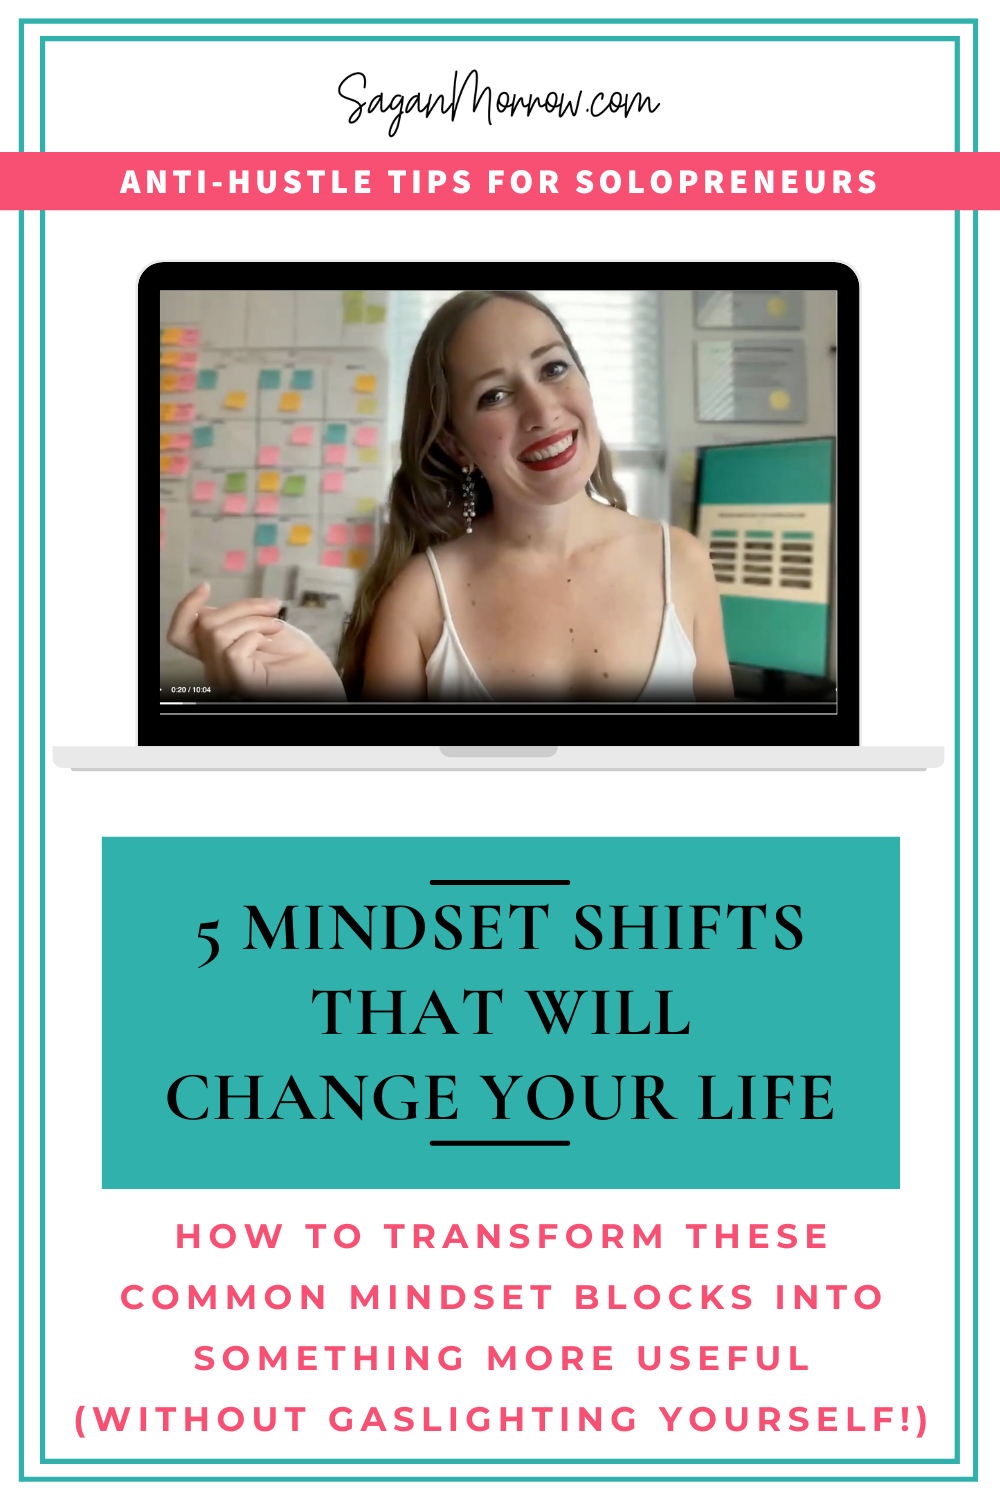 5 mindset shifts that will change your life